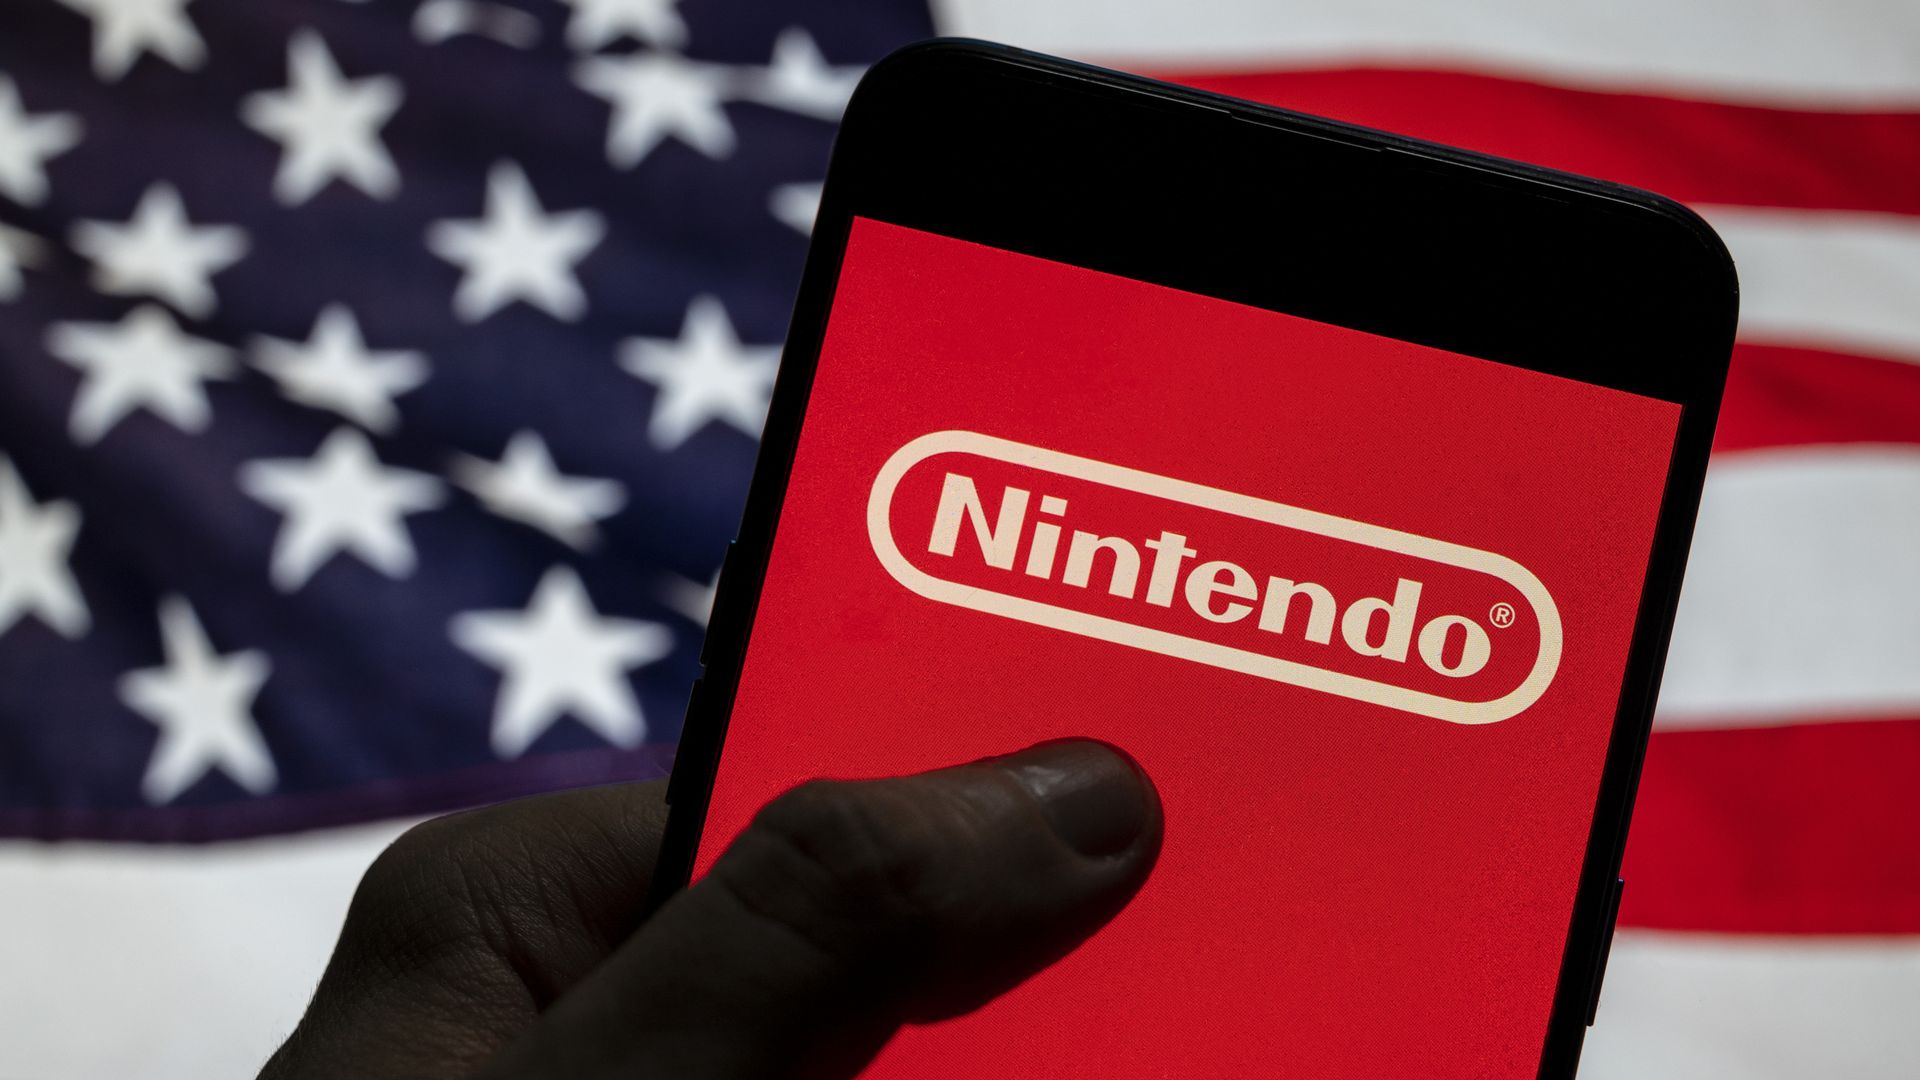 Photo of a phone with a Nintendo logo on it, held in front of an American flag